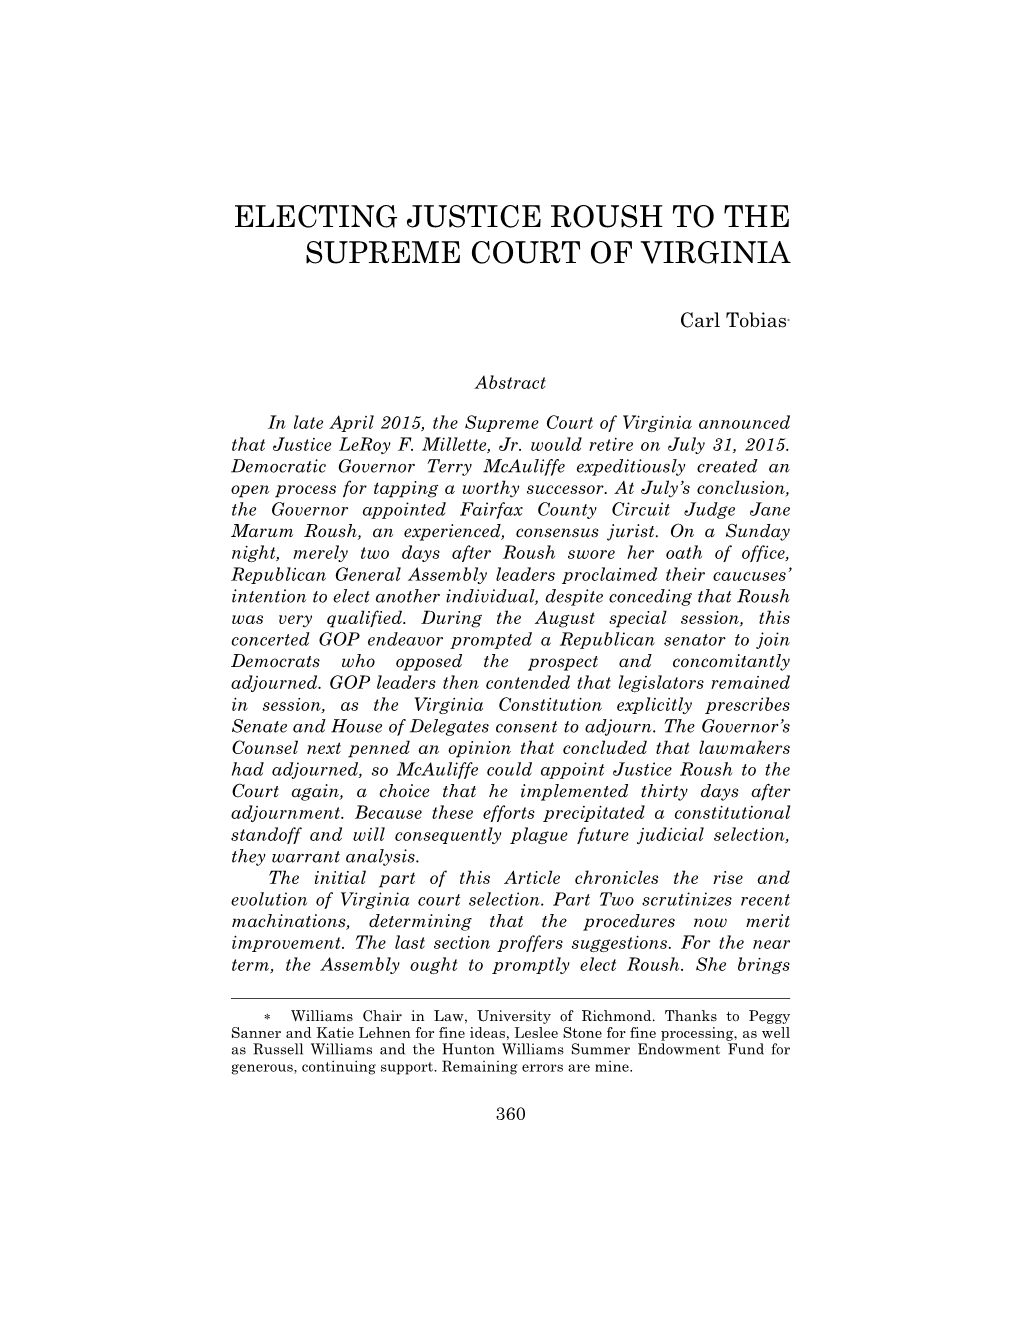 Electing Justice Roush to the Supreme Court of Virginia